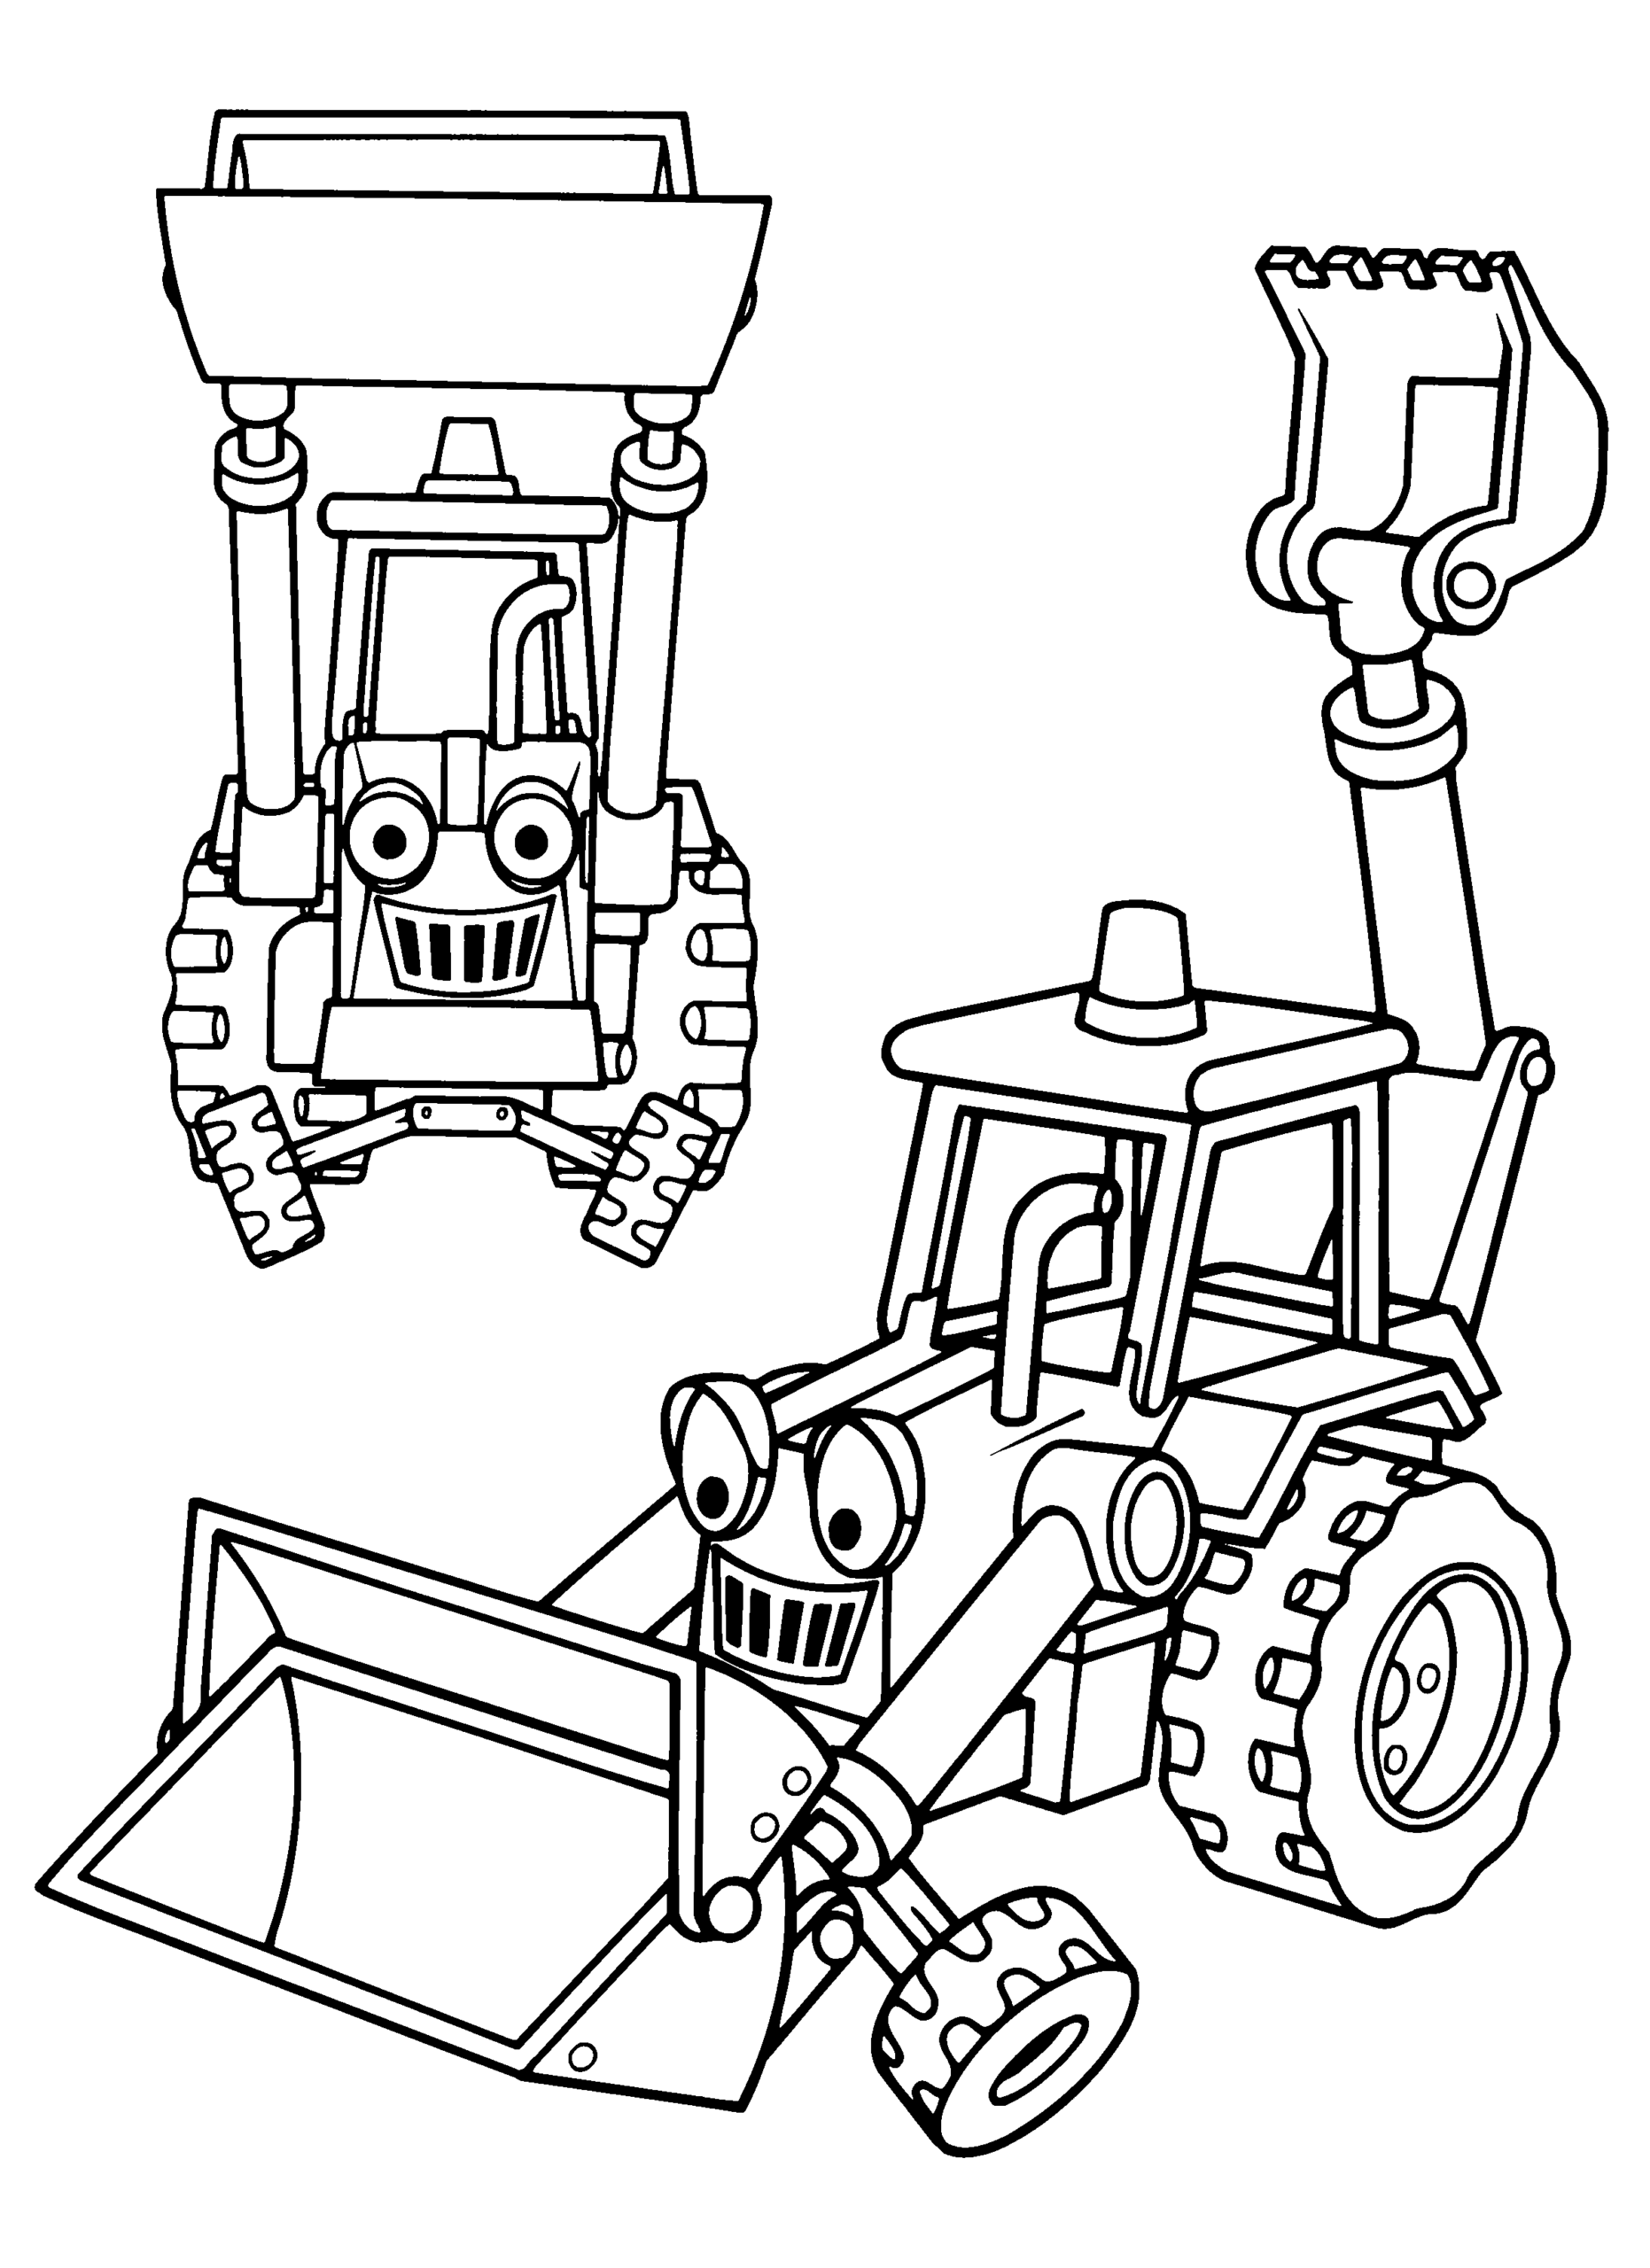 Bob the Builder Coloring Pages TV Film bob the builder 73 Printable 2020 01095 Coloring4free